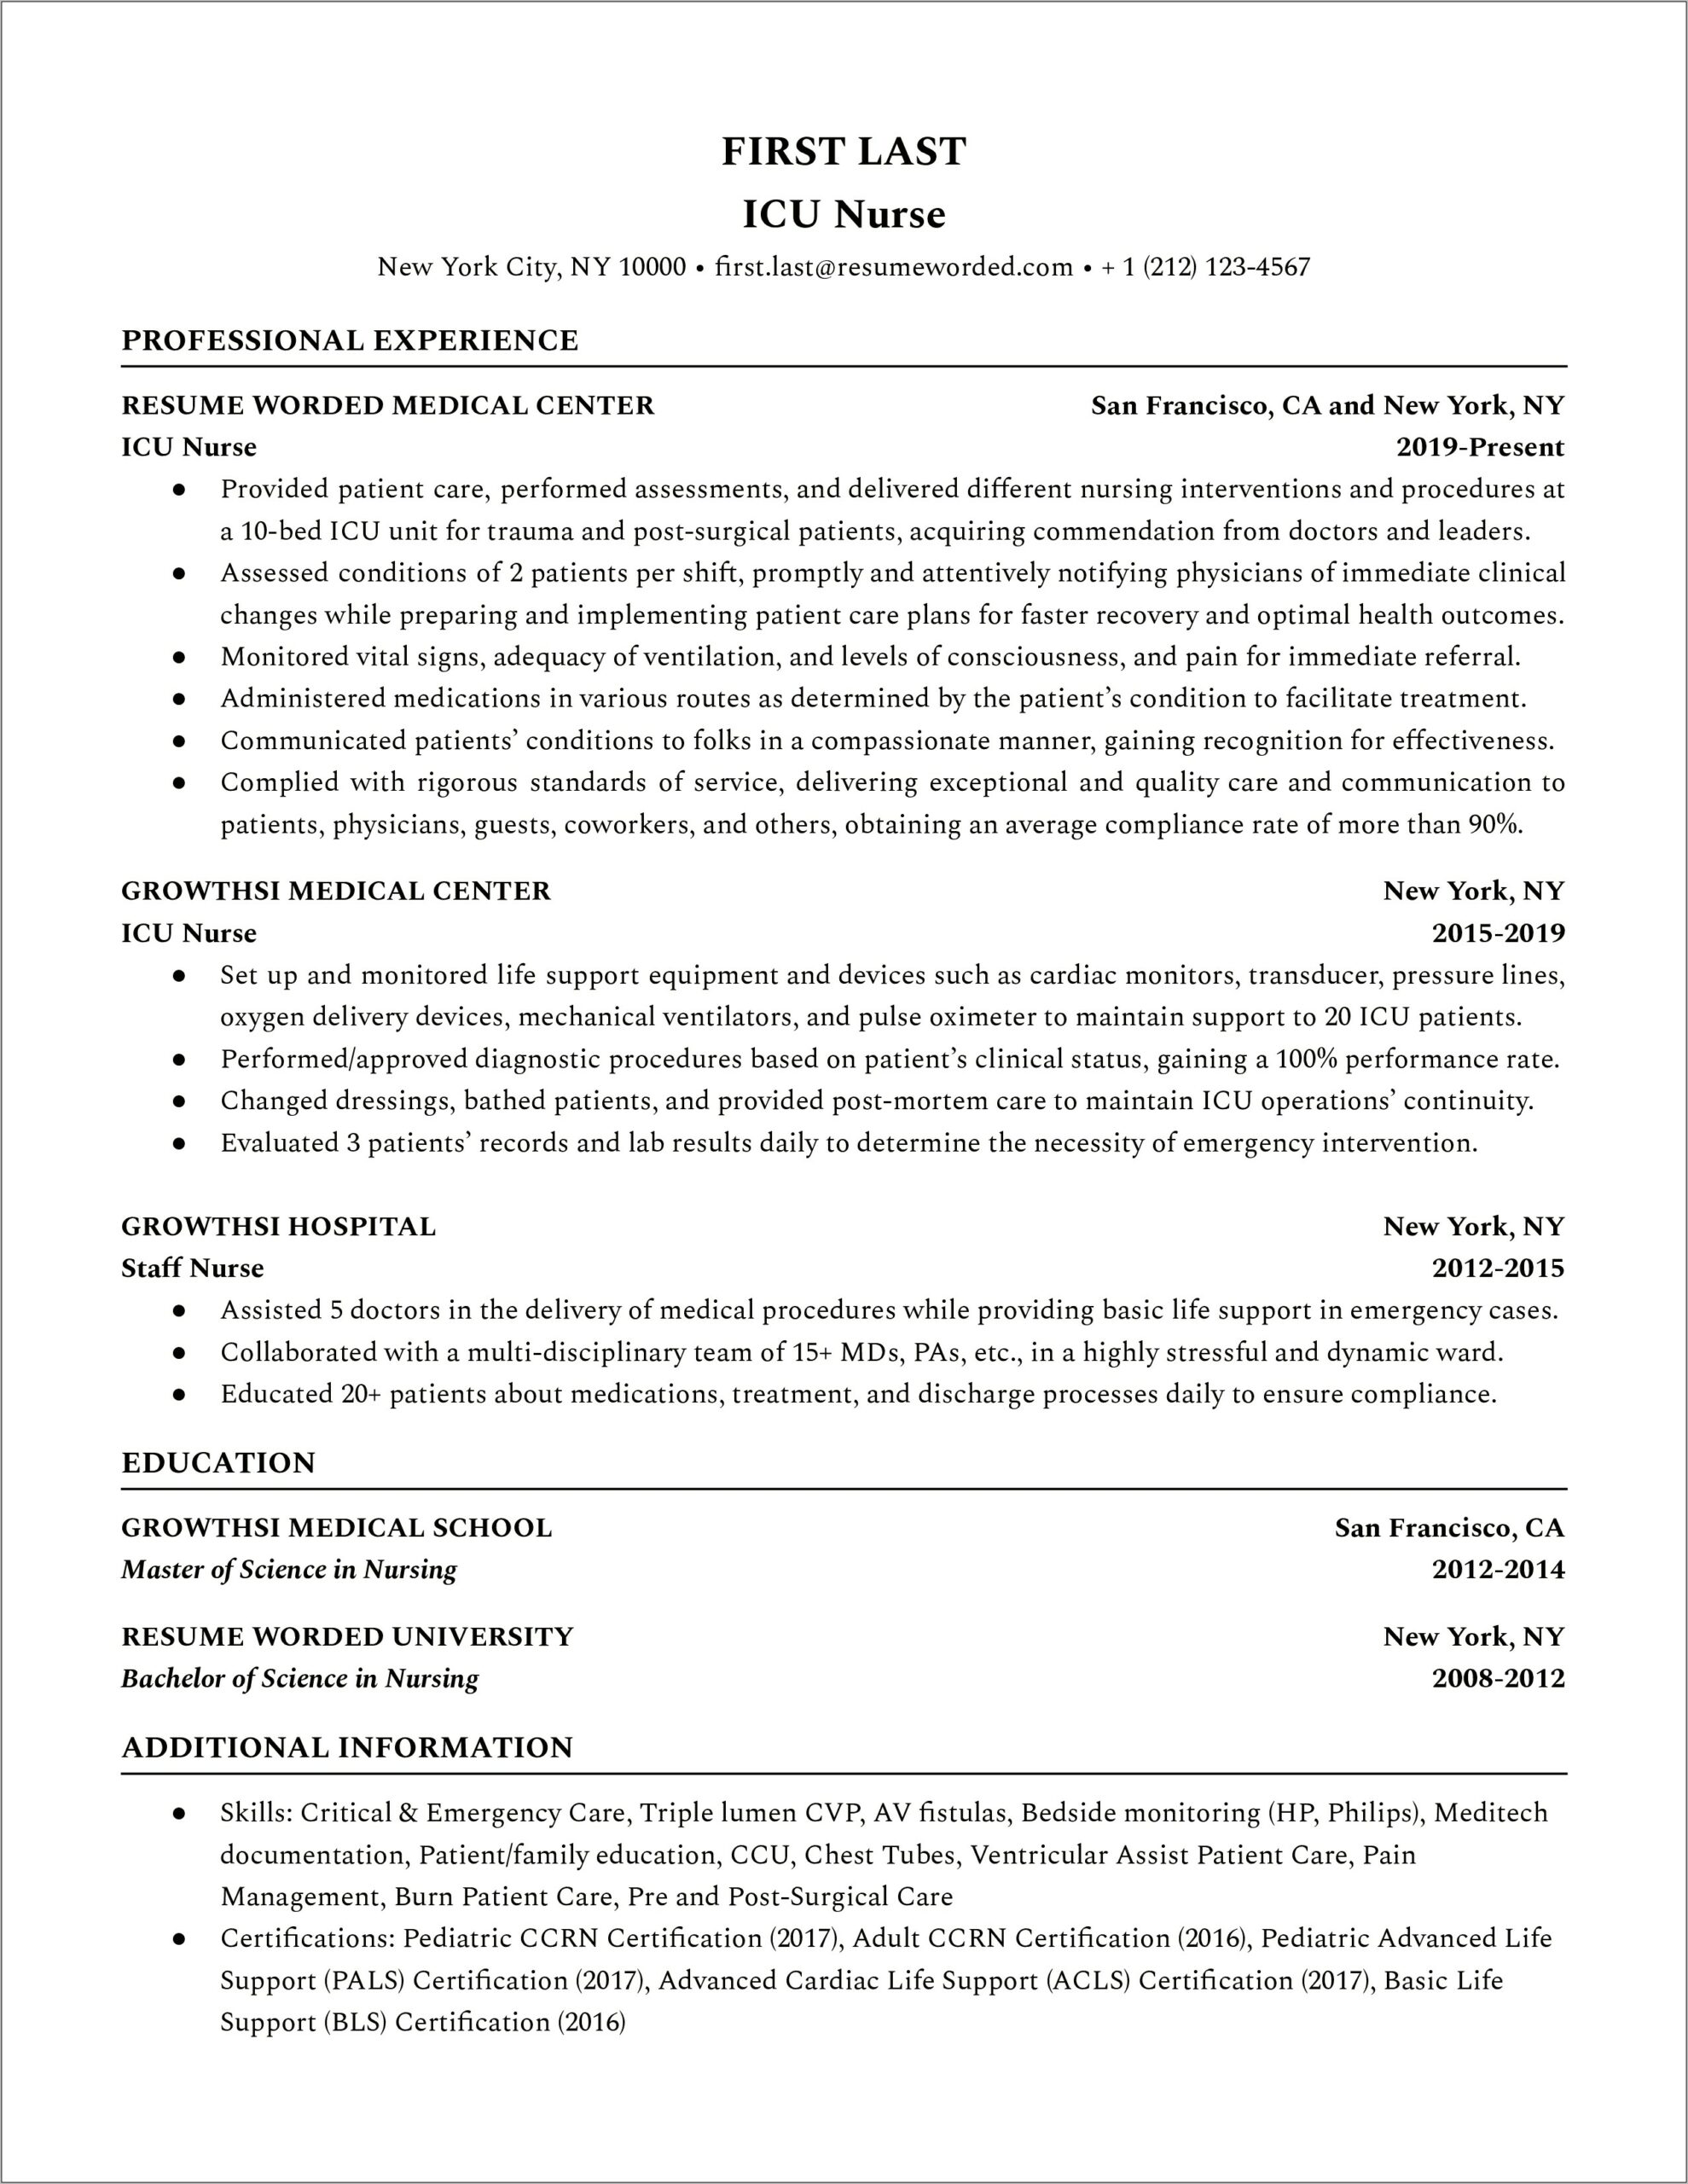 Resume Registered Nurse Family Practice With Experience